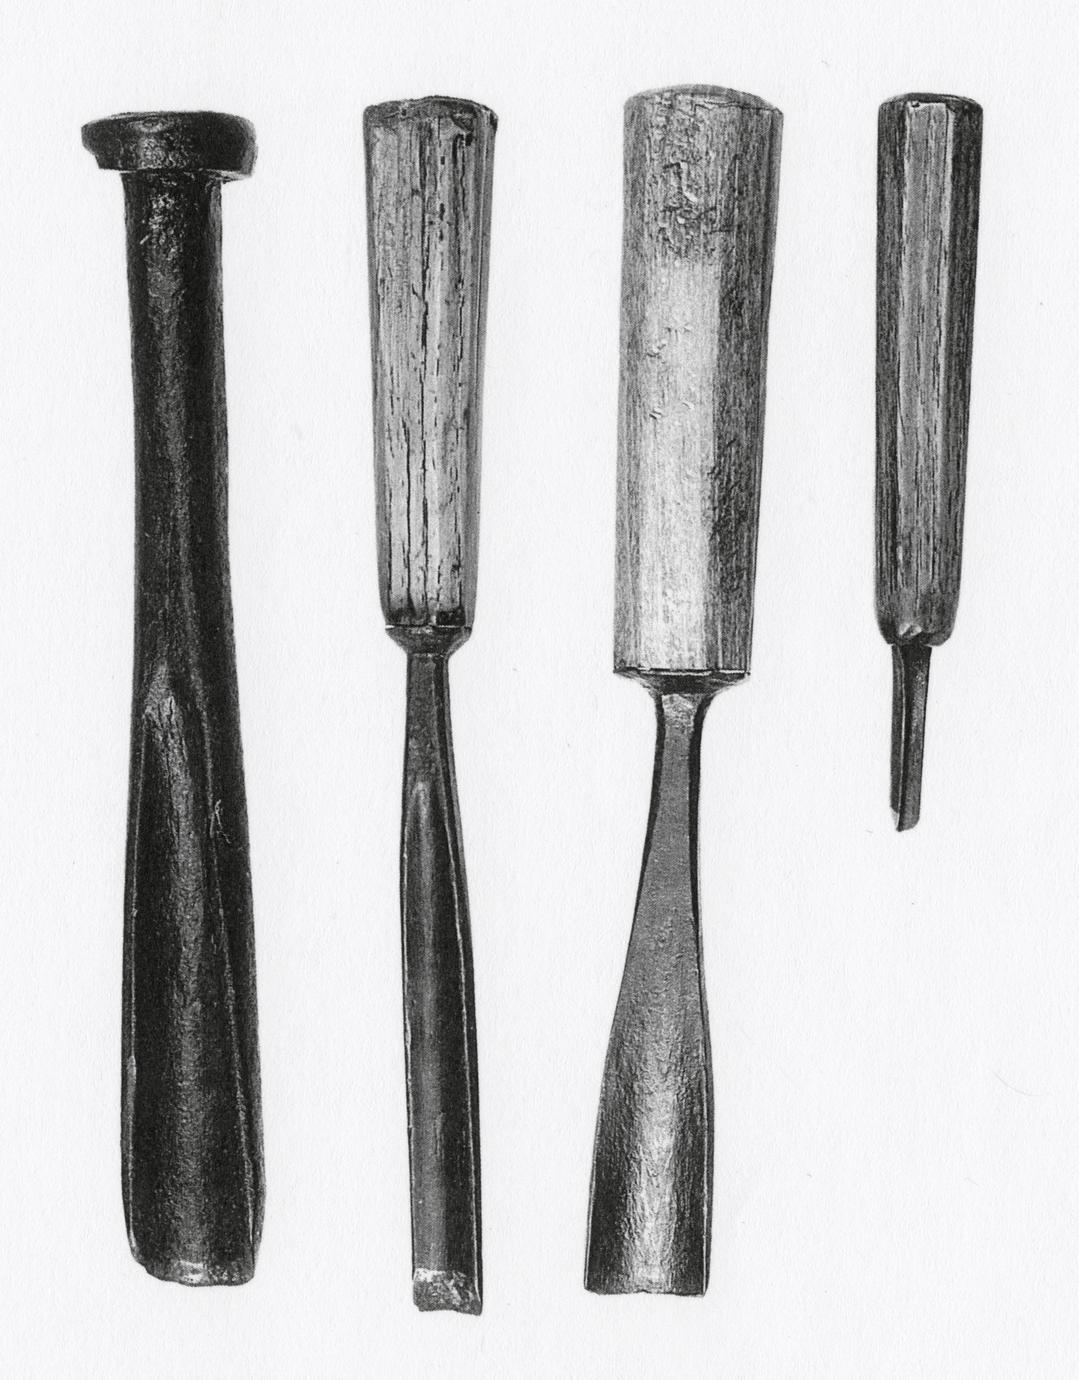 Four examples of gouges, all of different sizes and shapes.